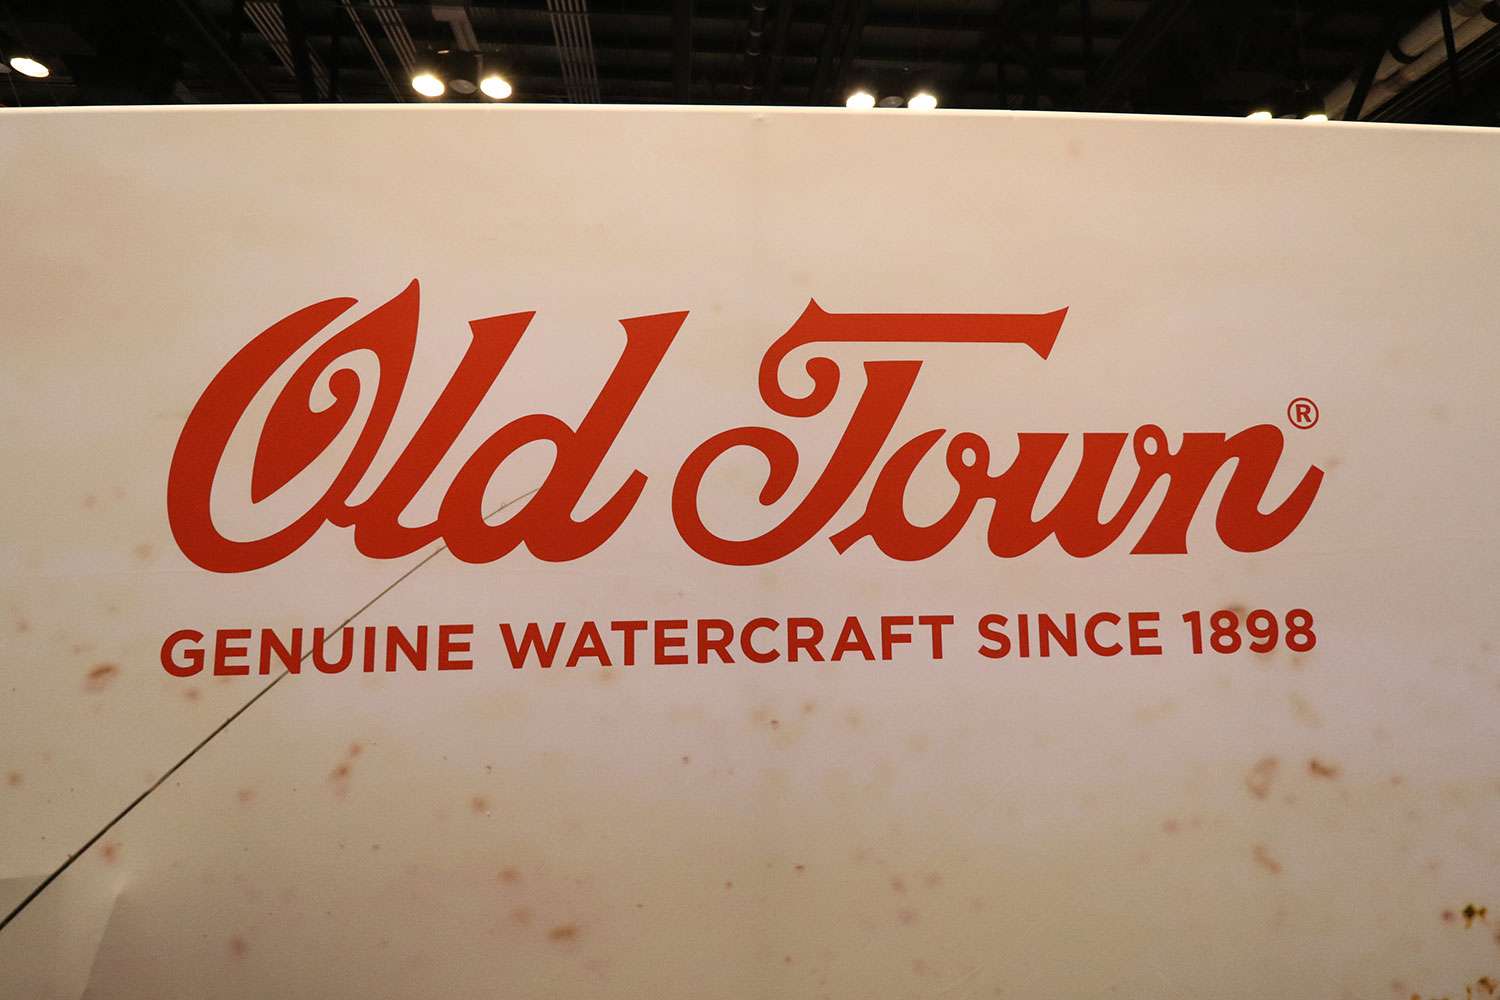 Old Town had a sweet booth set up at ICAST 2019 in Orlando, Fla. There they featured their hottest kayaks including the Topwater series and a newly updated Old Town Predator.